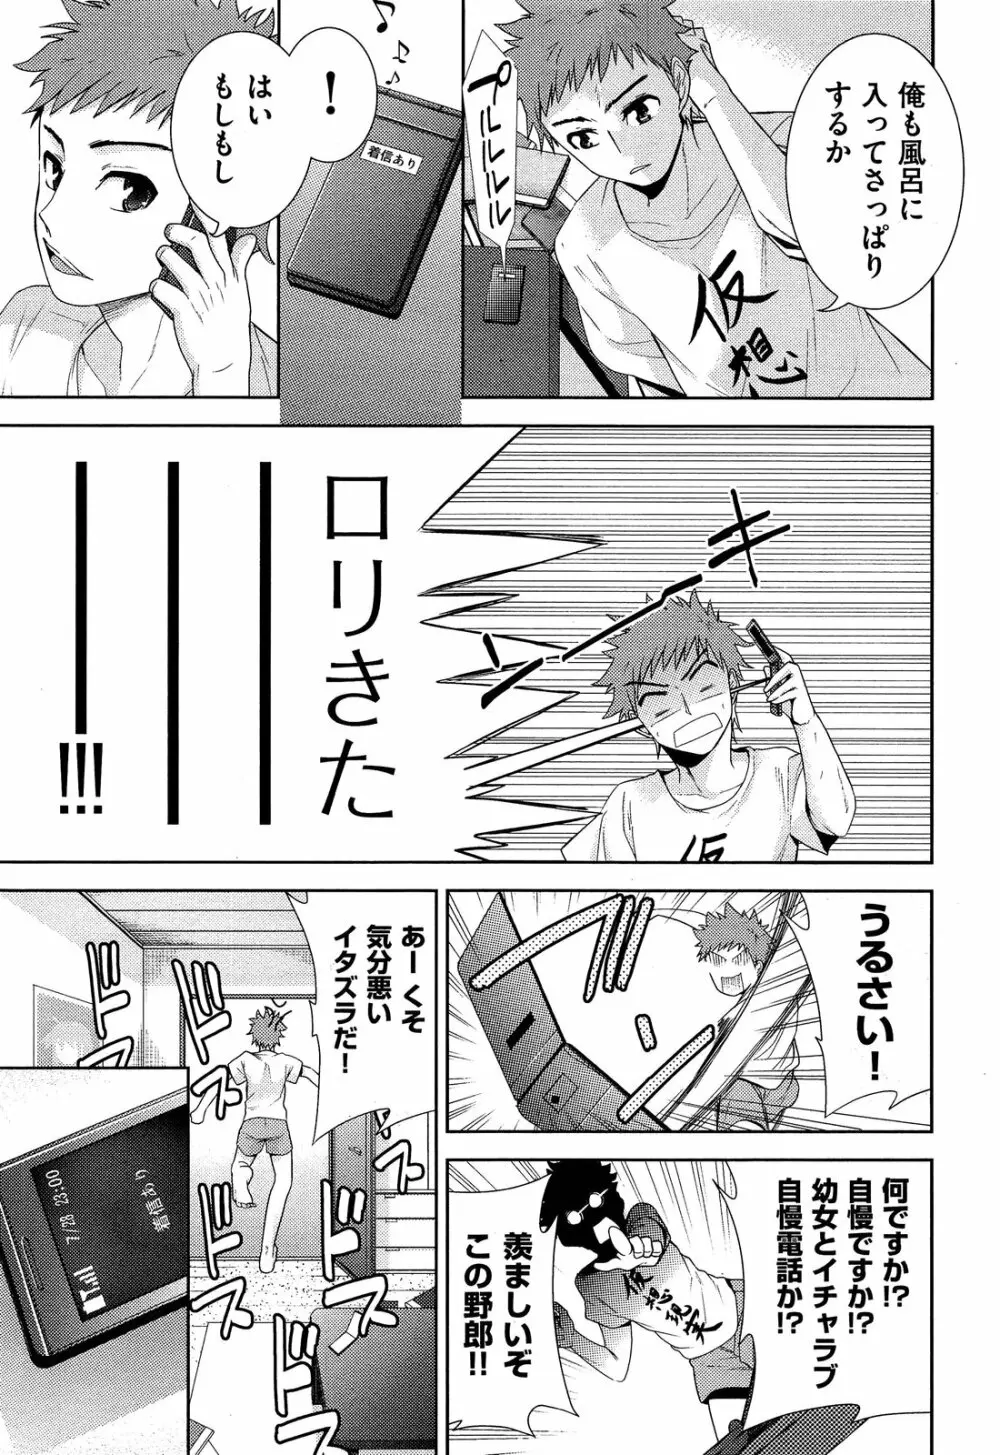 Two dimensions girlfriend Ch.1-4 27ページ